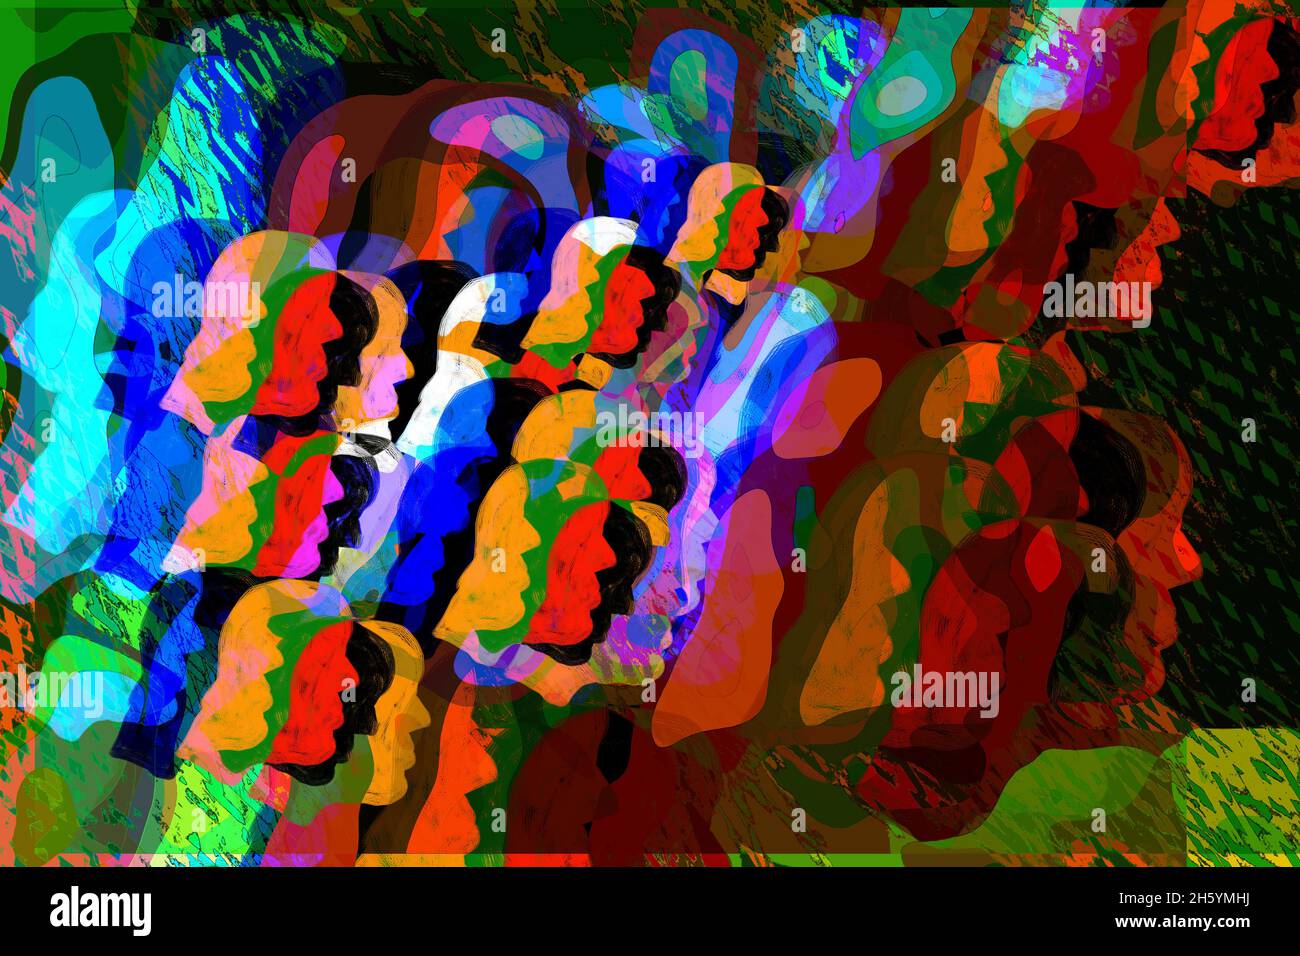 Abstract art. Crowd concept. Many colored faces in a crowd. Stock Photo